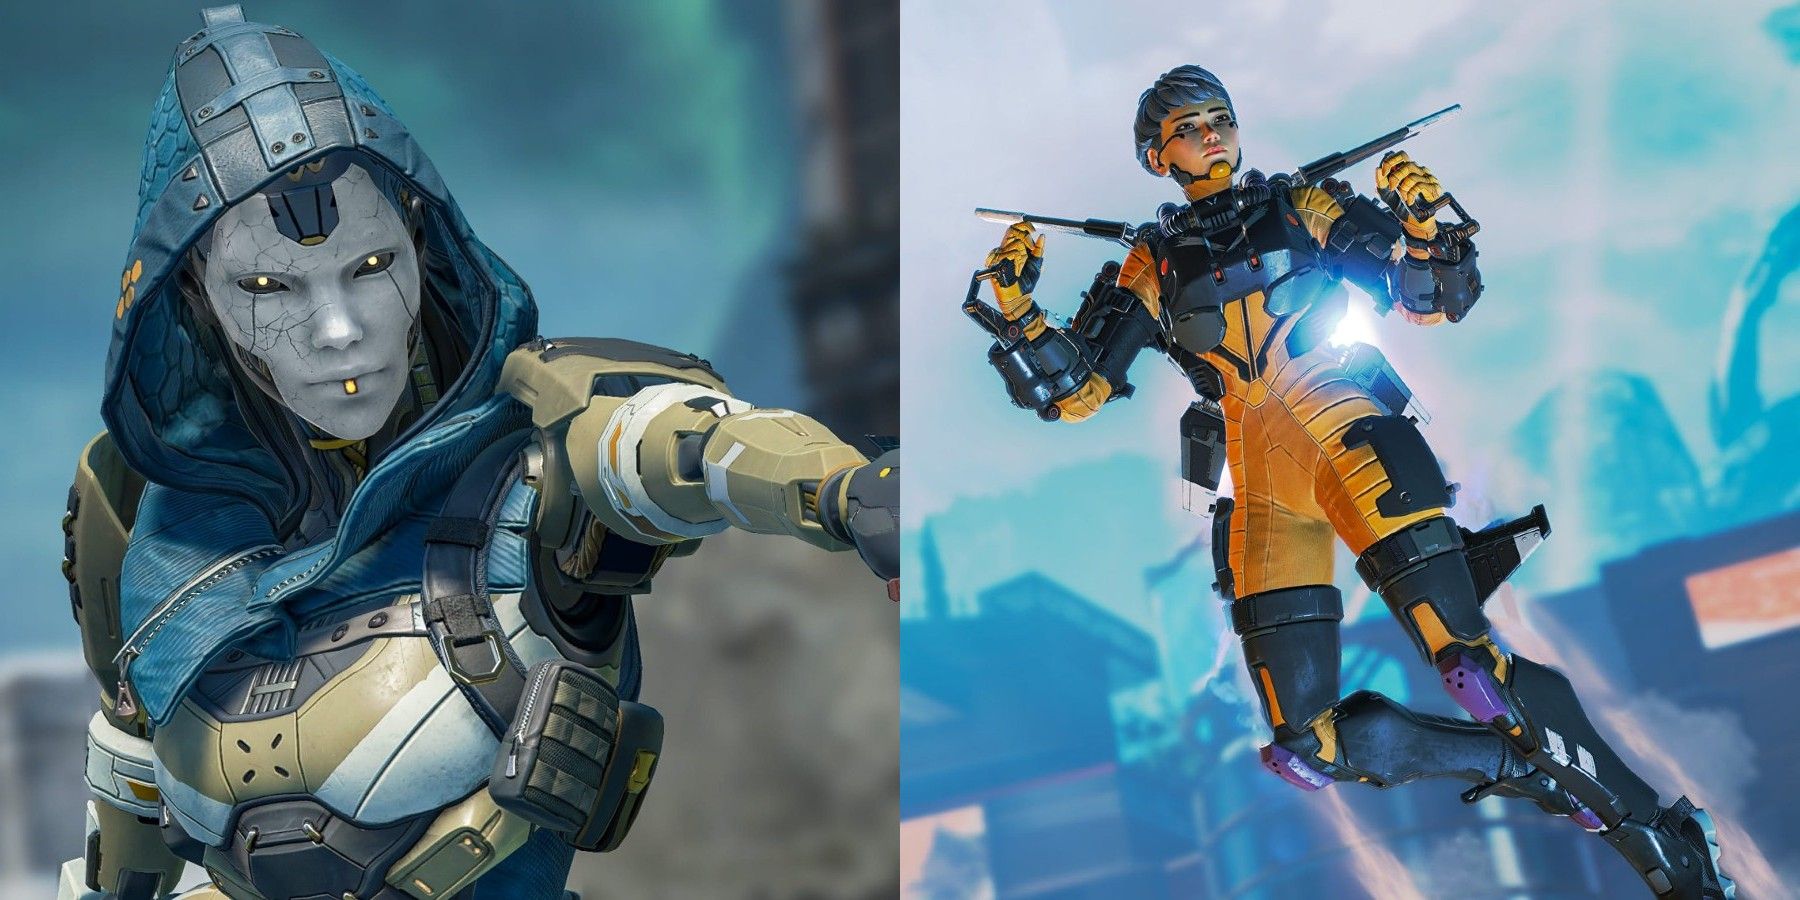 Clever Apex Legends Combo with Ash Lets Valkyrie Fly Further Across the Map